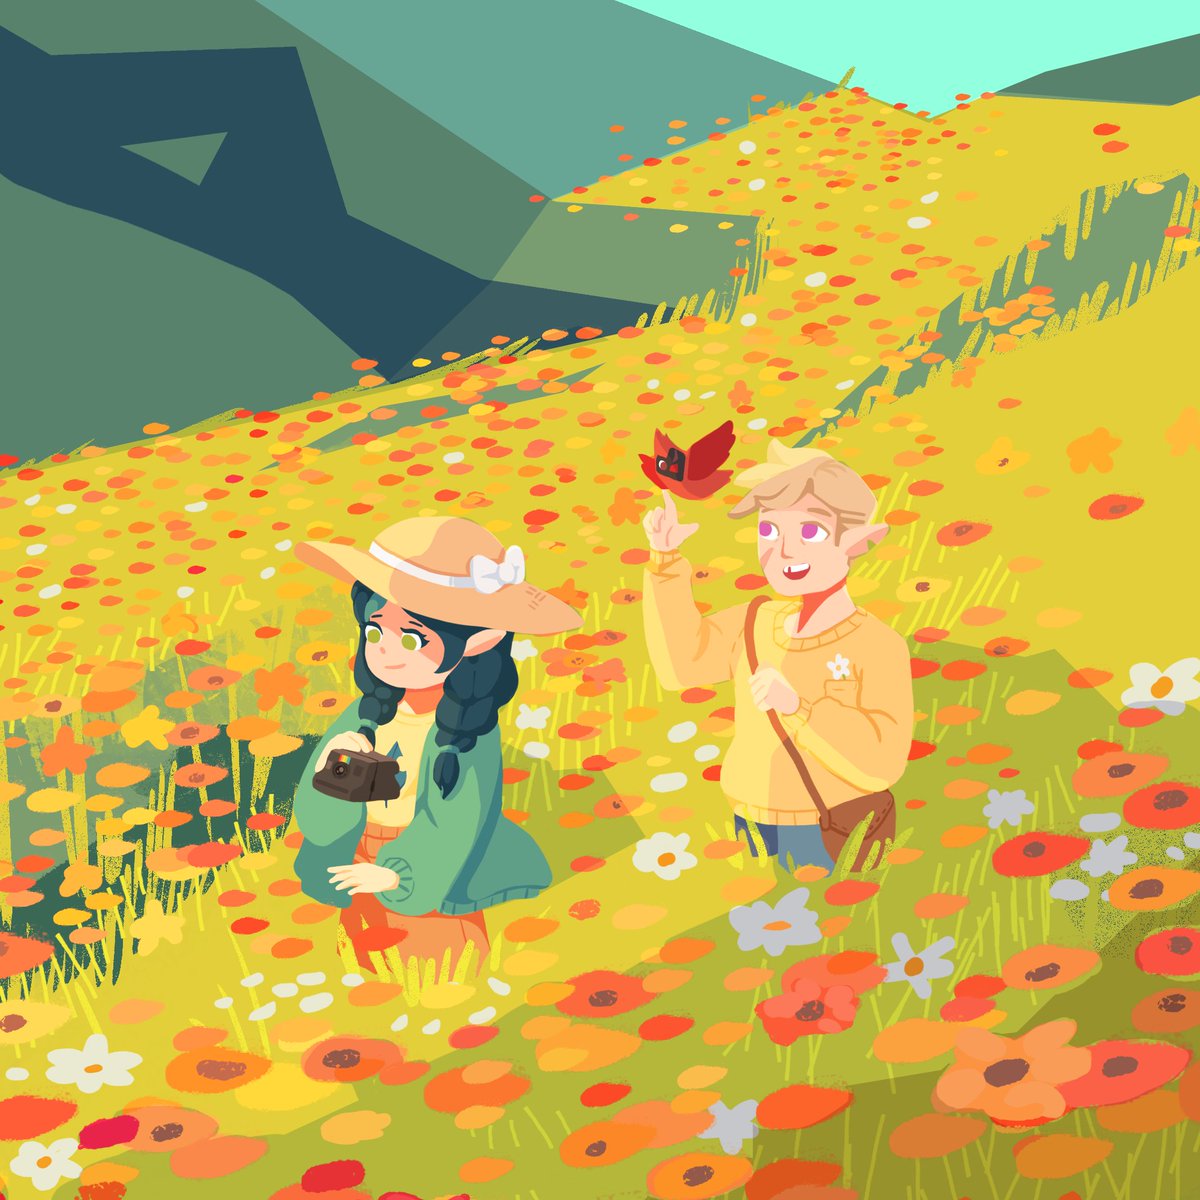 「Flower Fields #TheOwlHouse #Huntlow 」|Cocoのイラスト